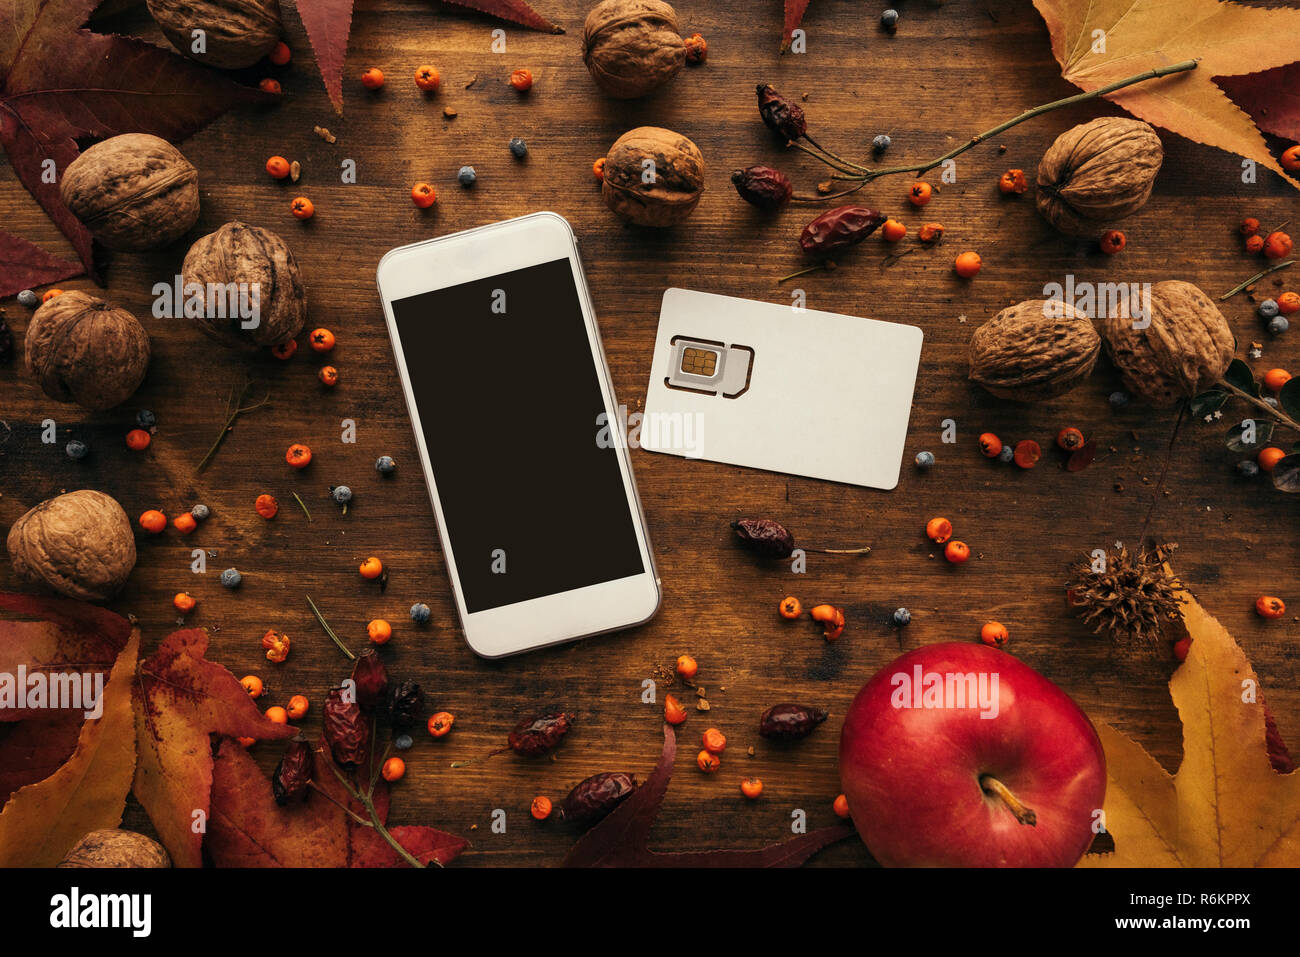 Mobile phone and SIM card with autumn arrangement. Top view flat lay of smartphone device with blank mock up screen as copy space. Stock Photo